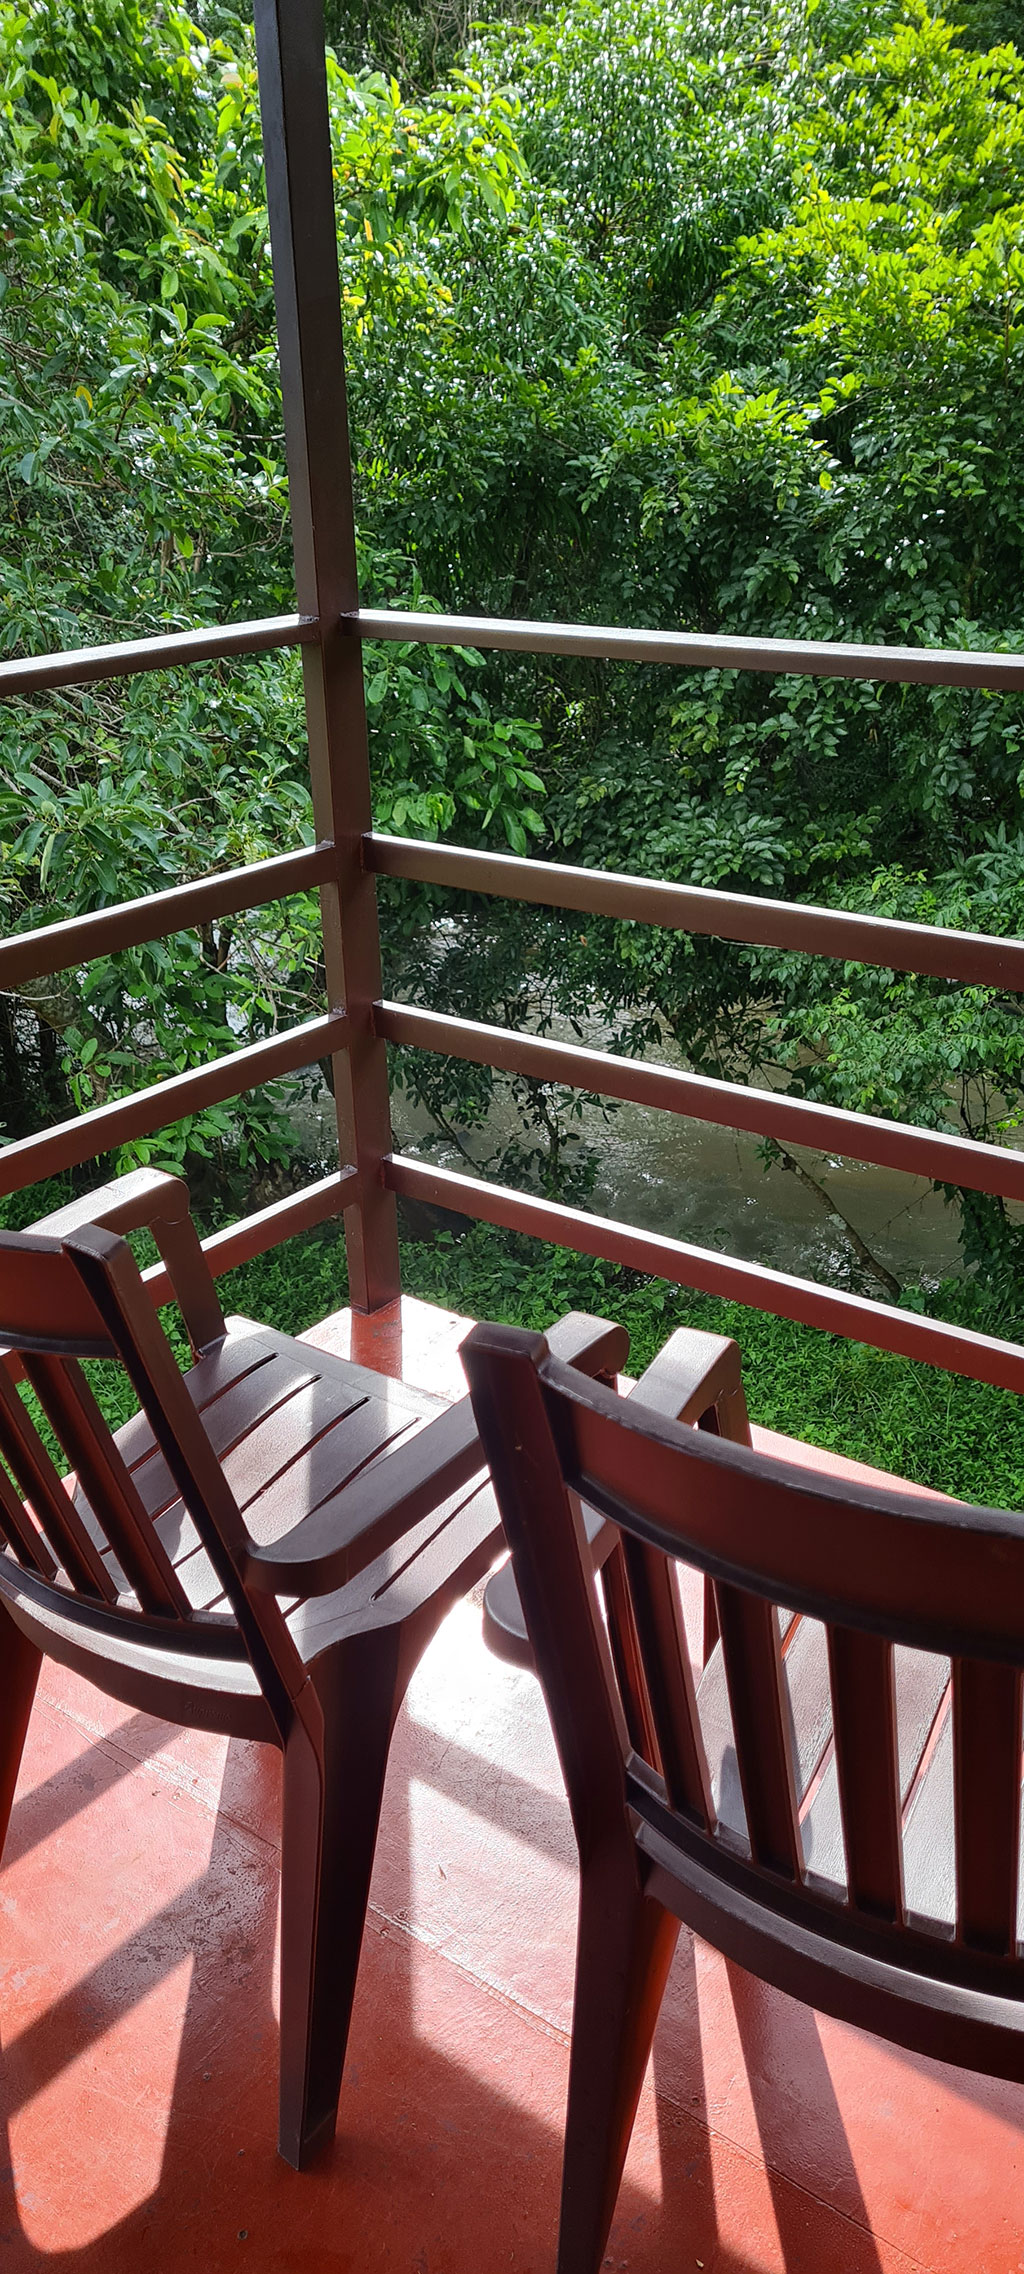 Safety Measures to Follow During a Tree House Stay